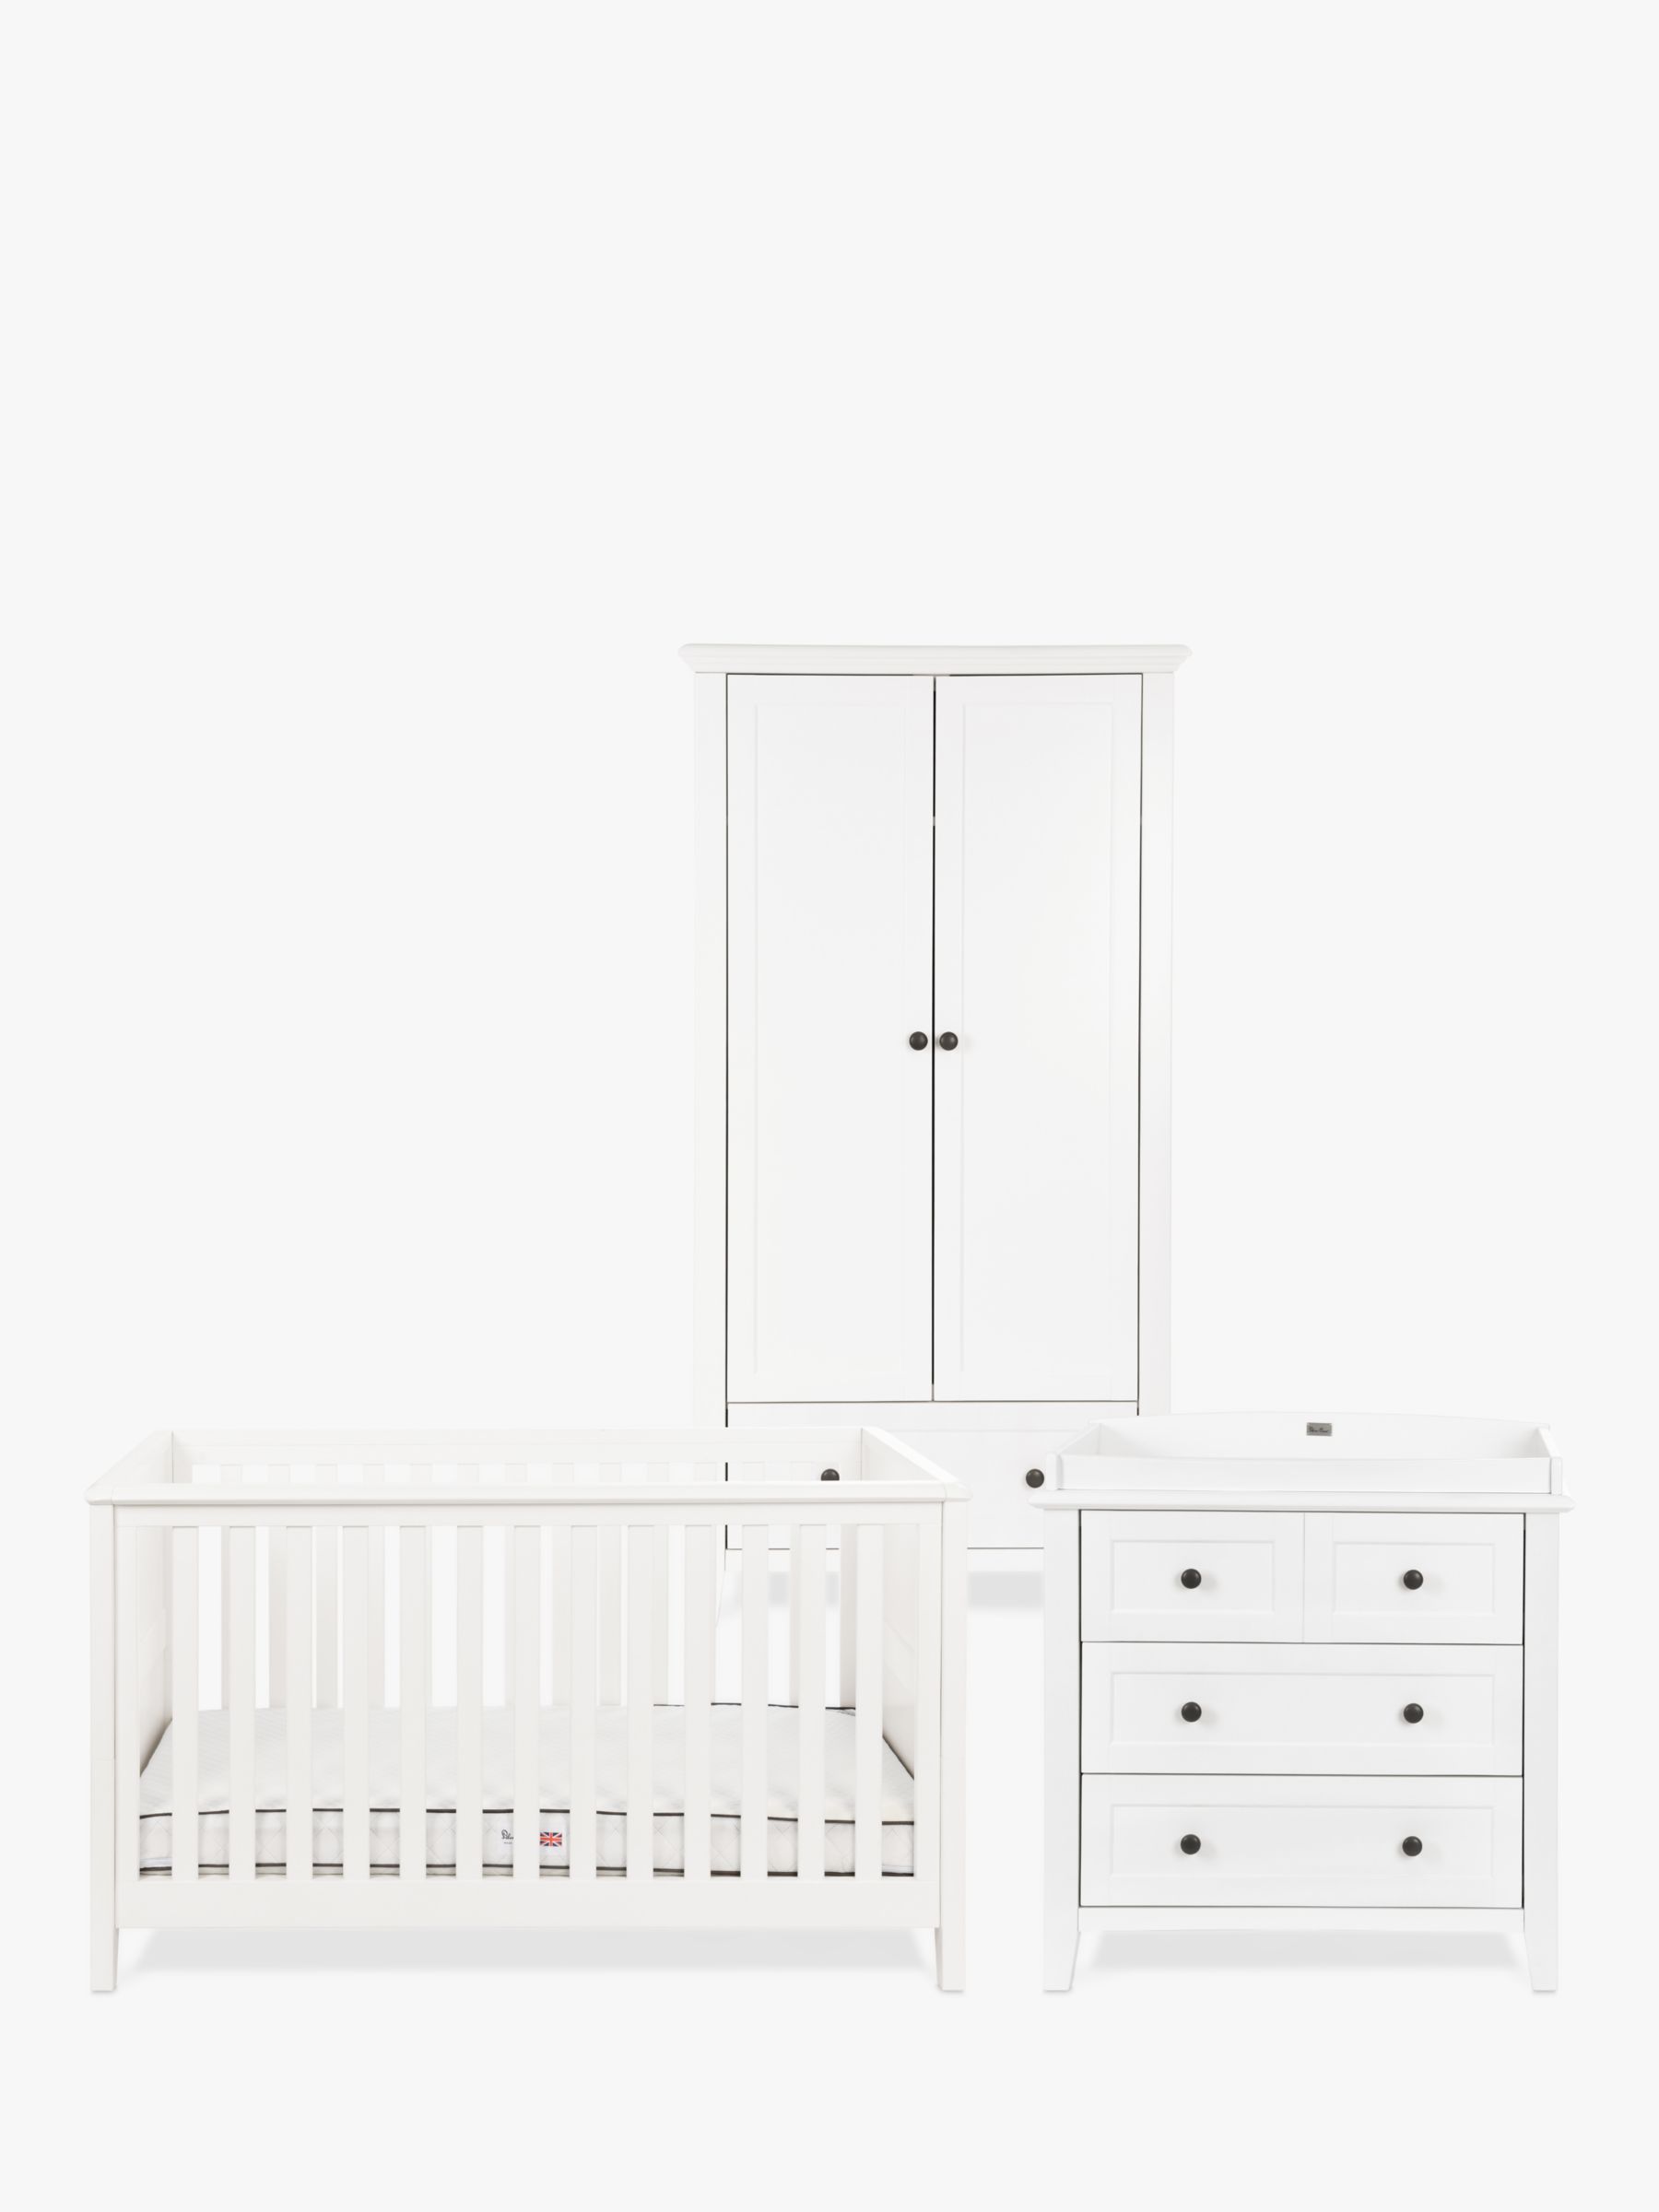 wardrobes for baby nursery